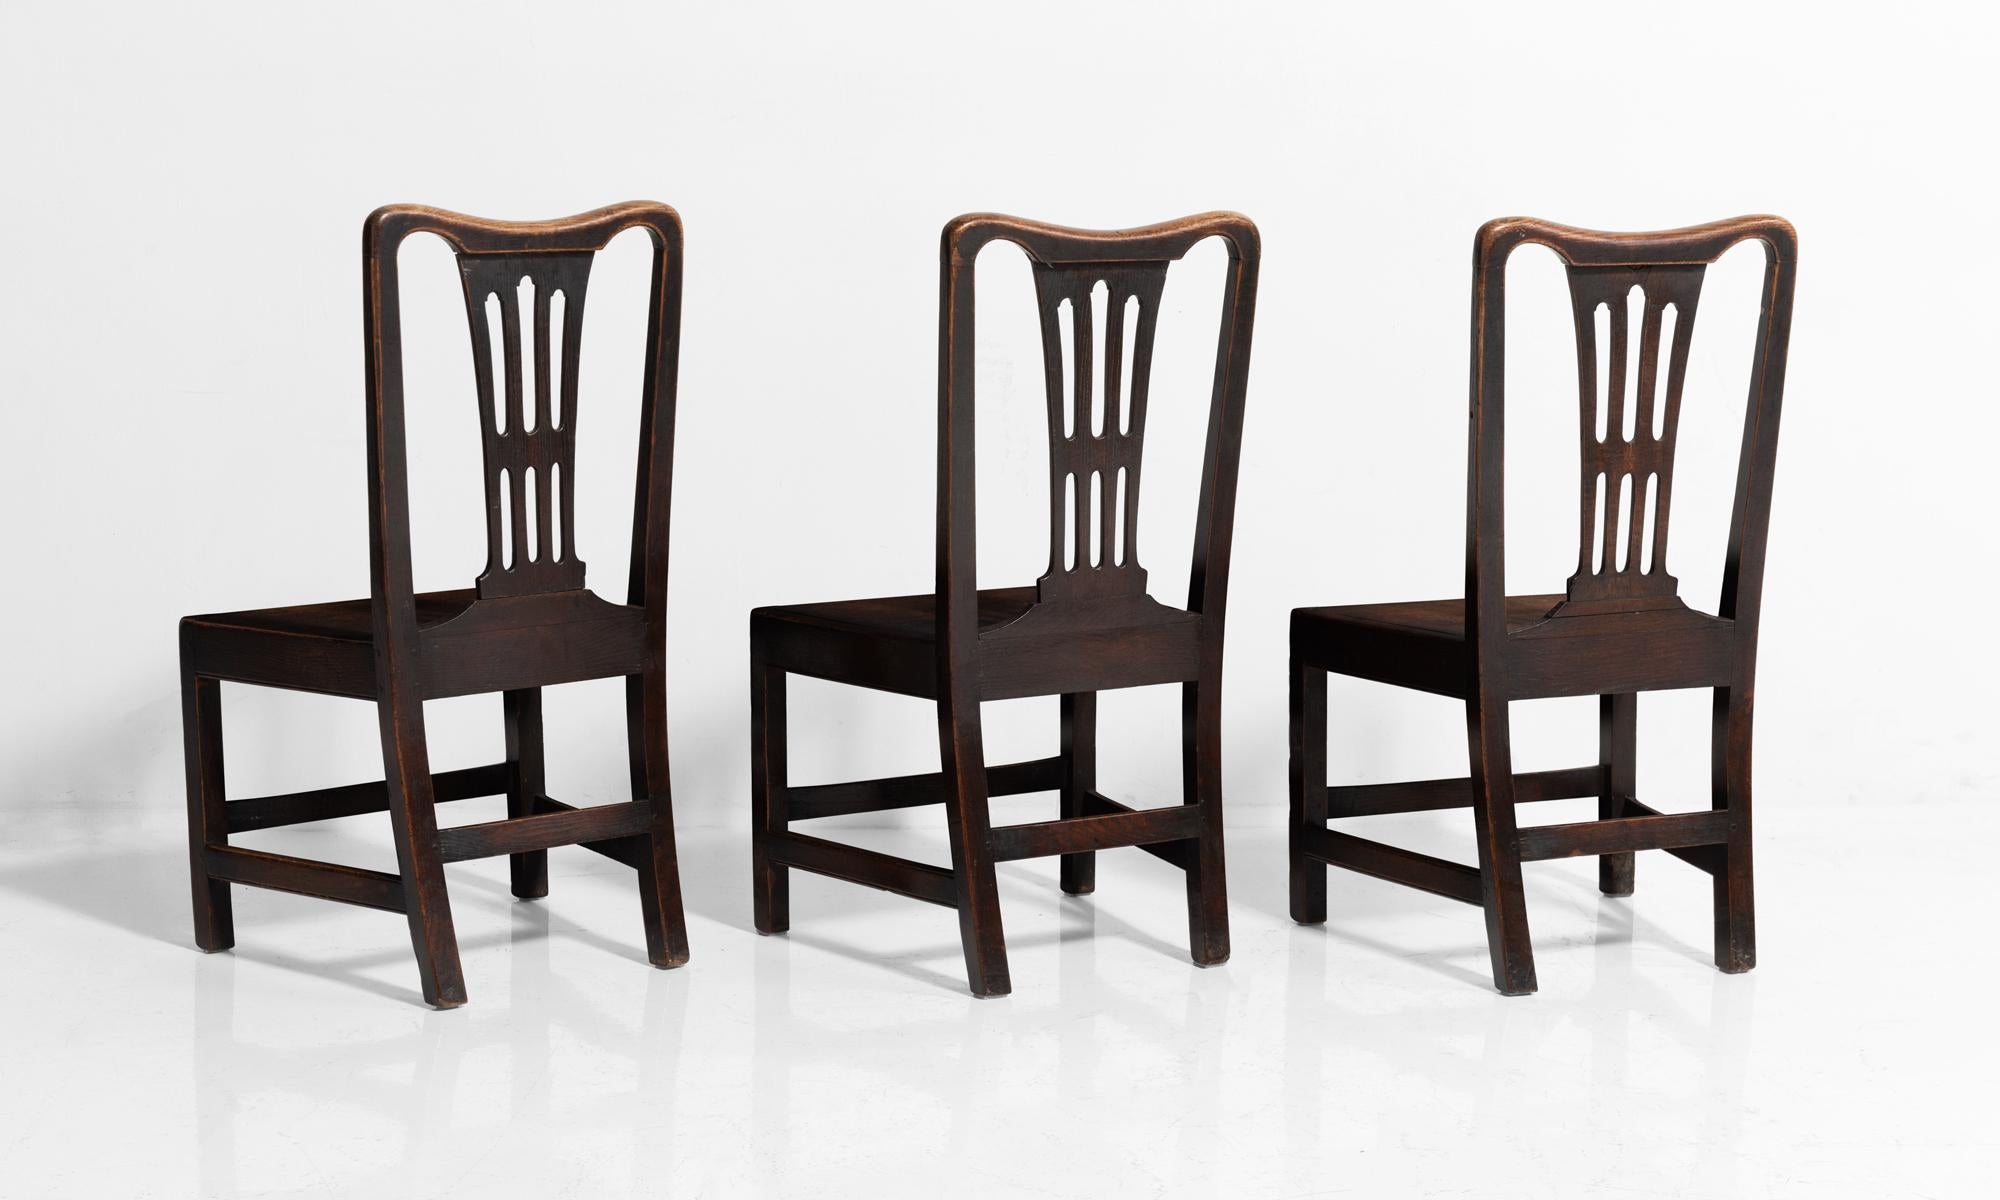 Solid oak chairs with single piece inset oak seats.